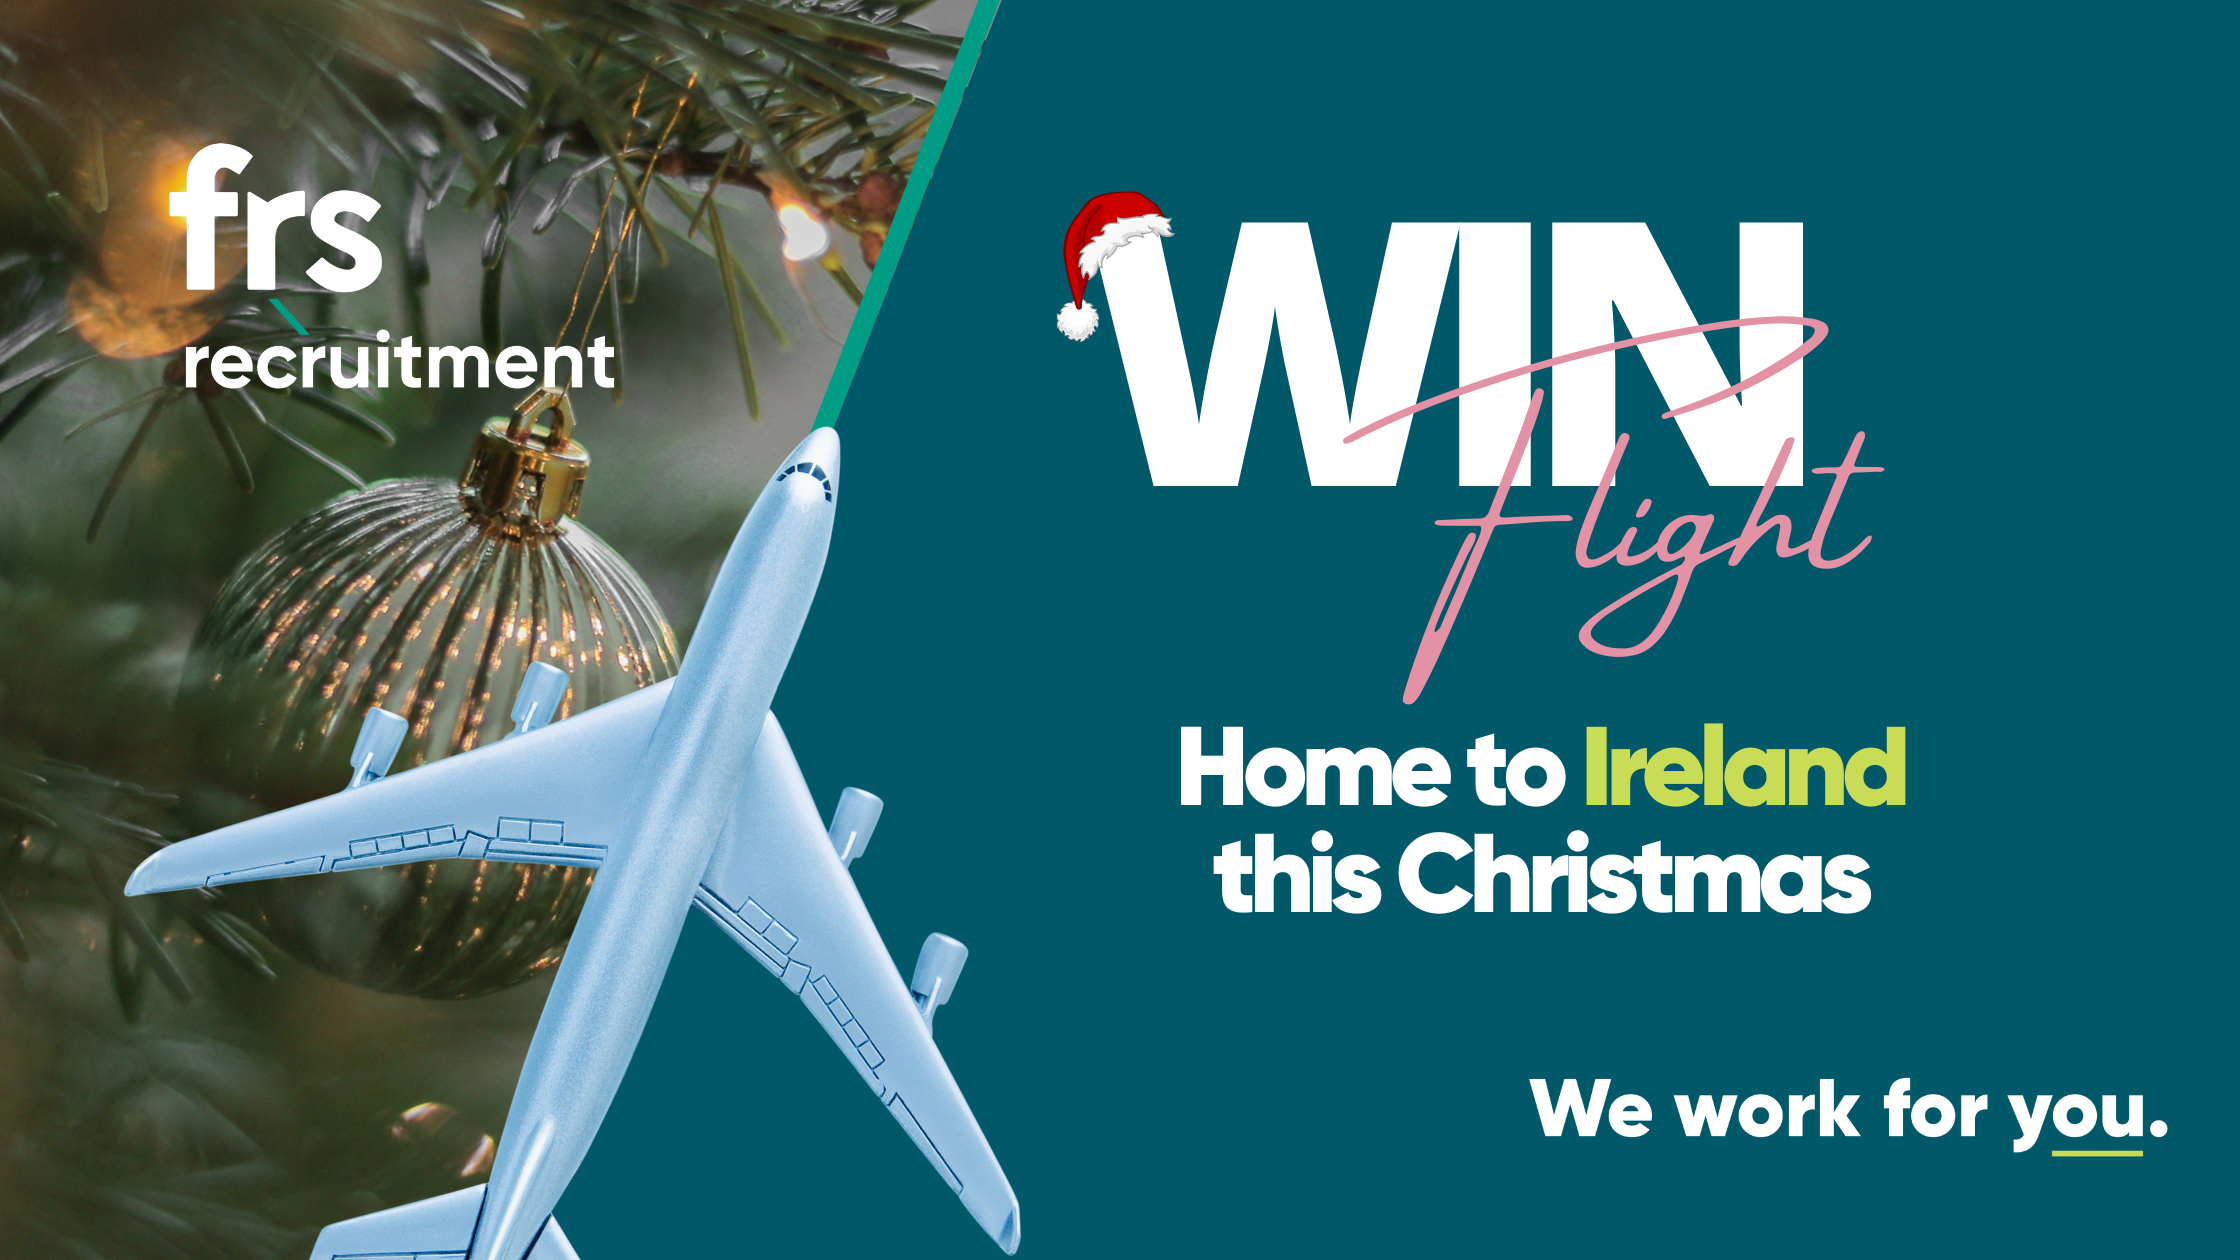 FRS Launch Christmas Competition for Irish Ex-Pats